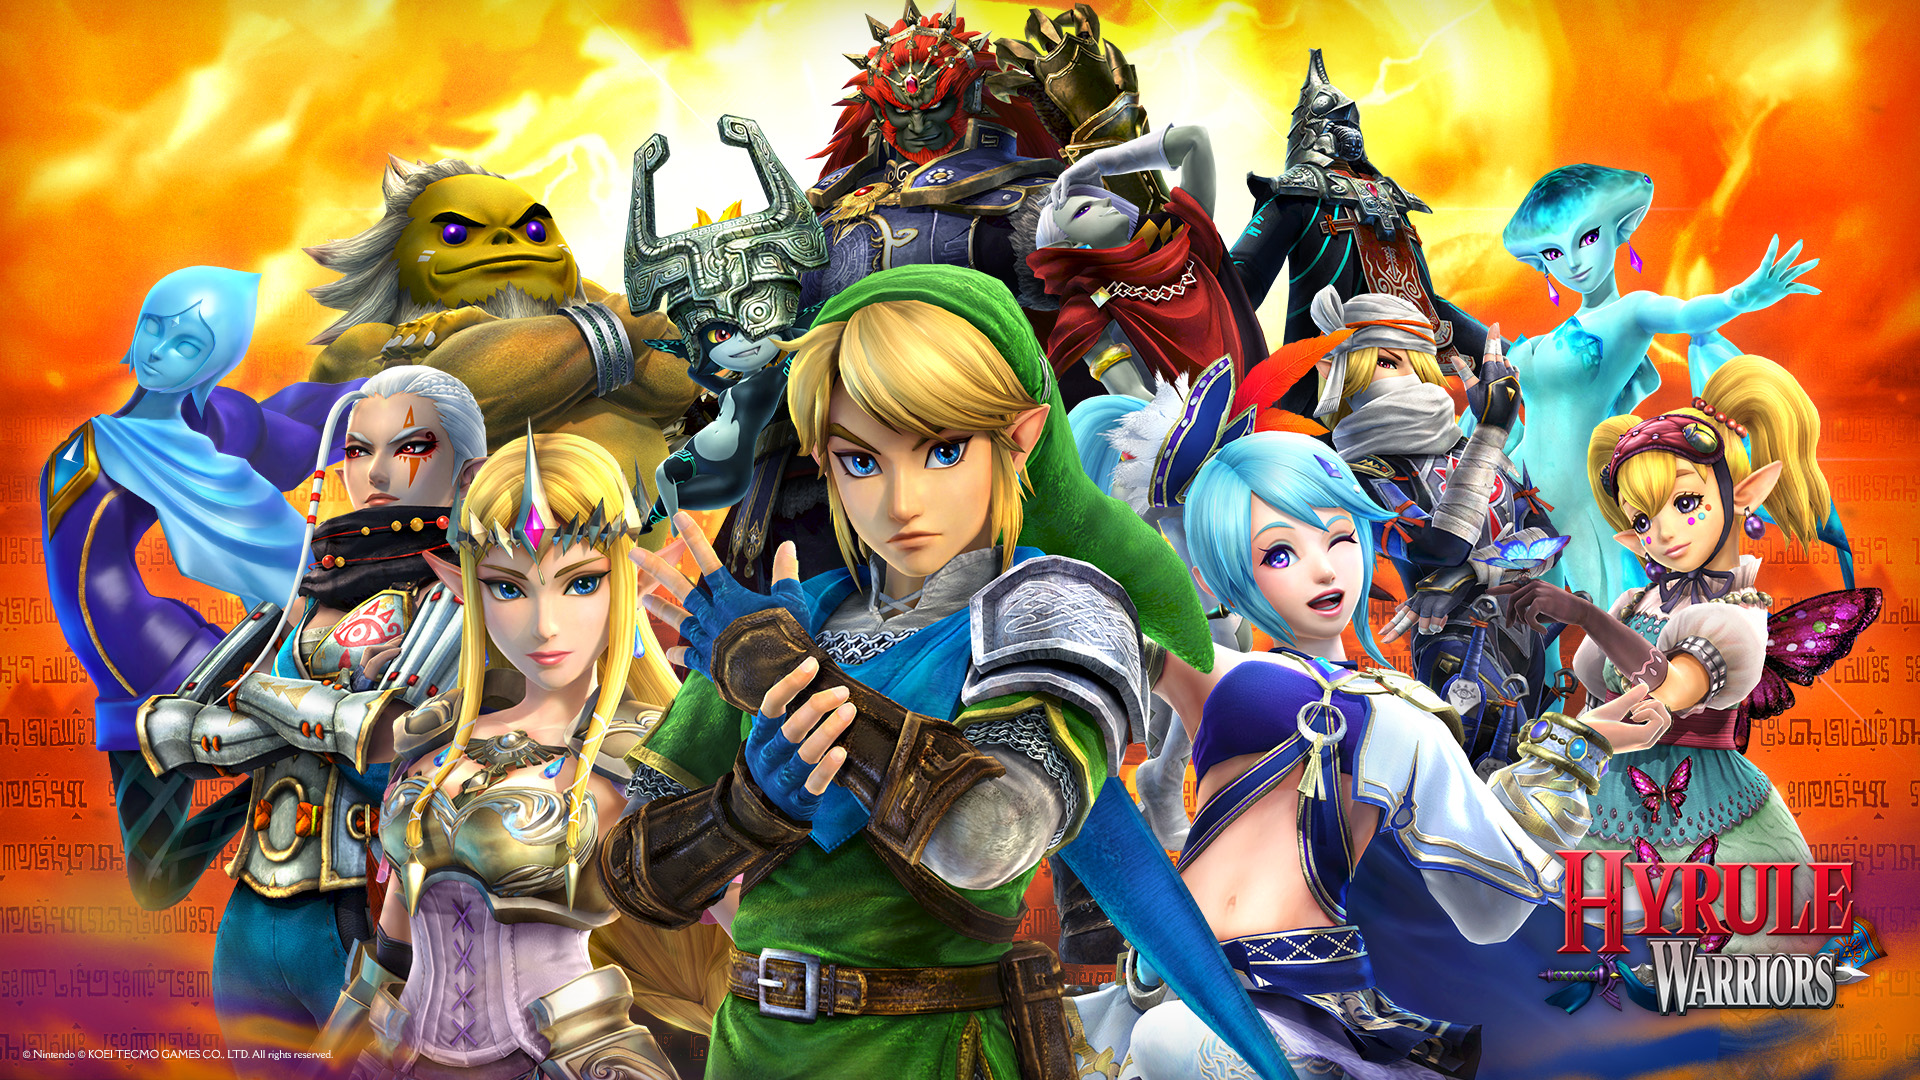 Video Game Hyrule Warriors HD Wallpaper | Background Image